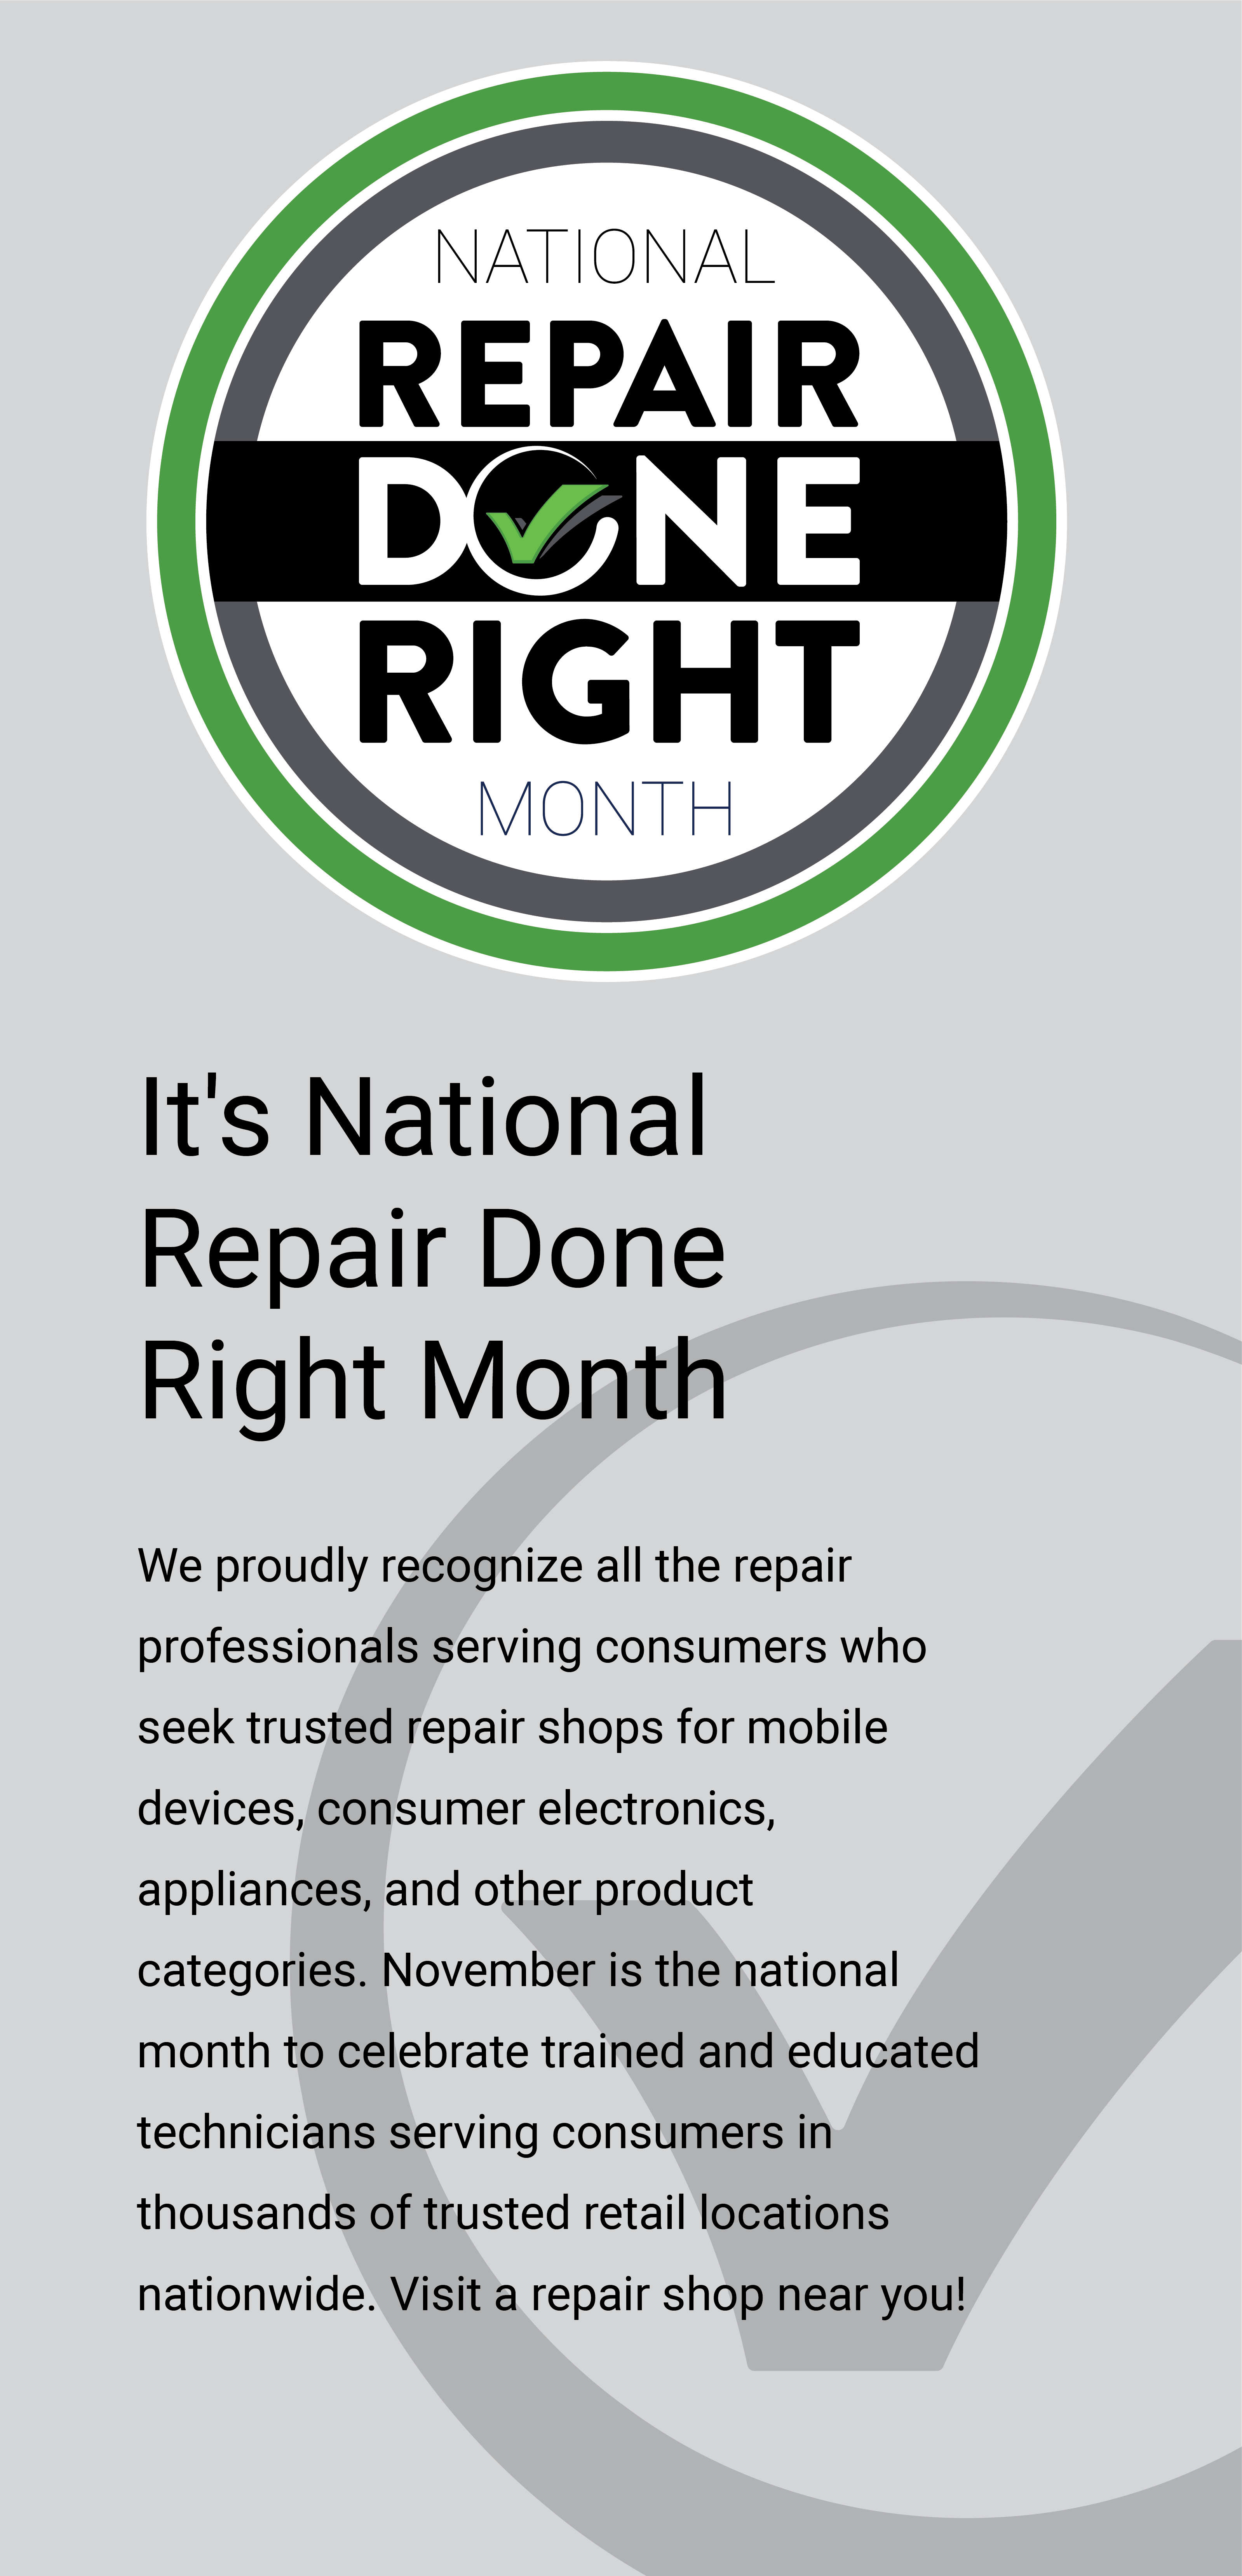 Repair Done Right Month